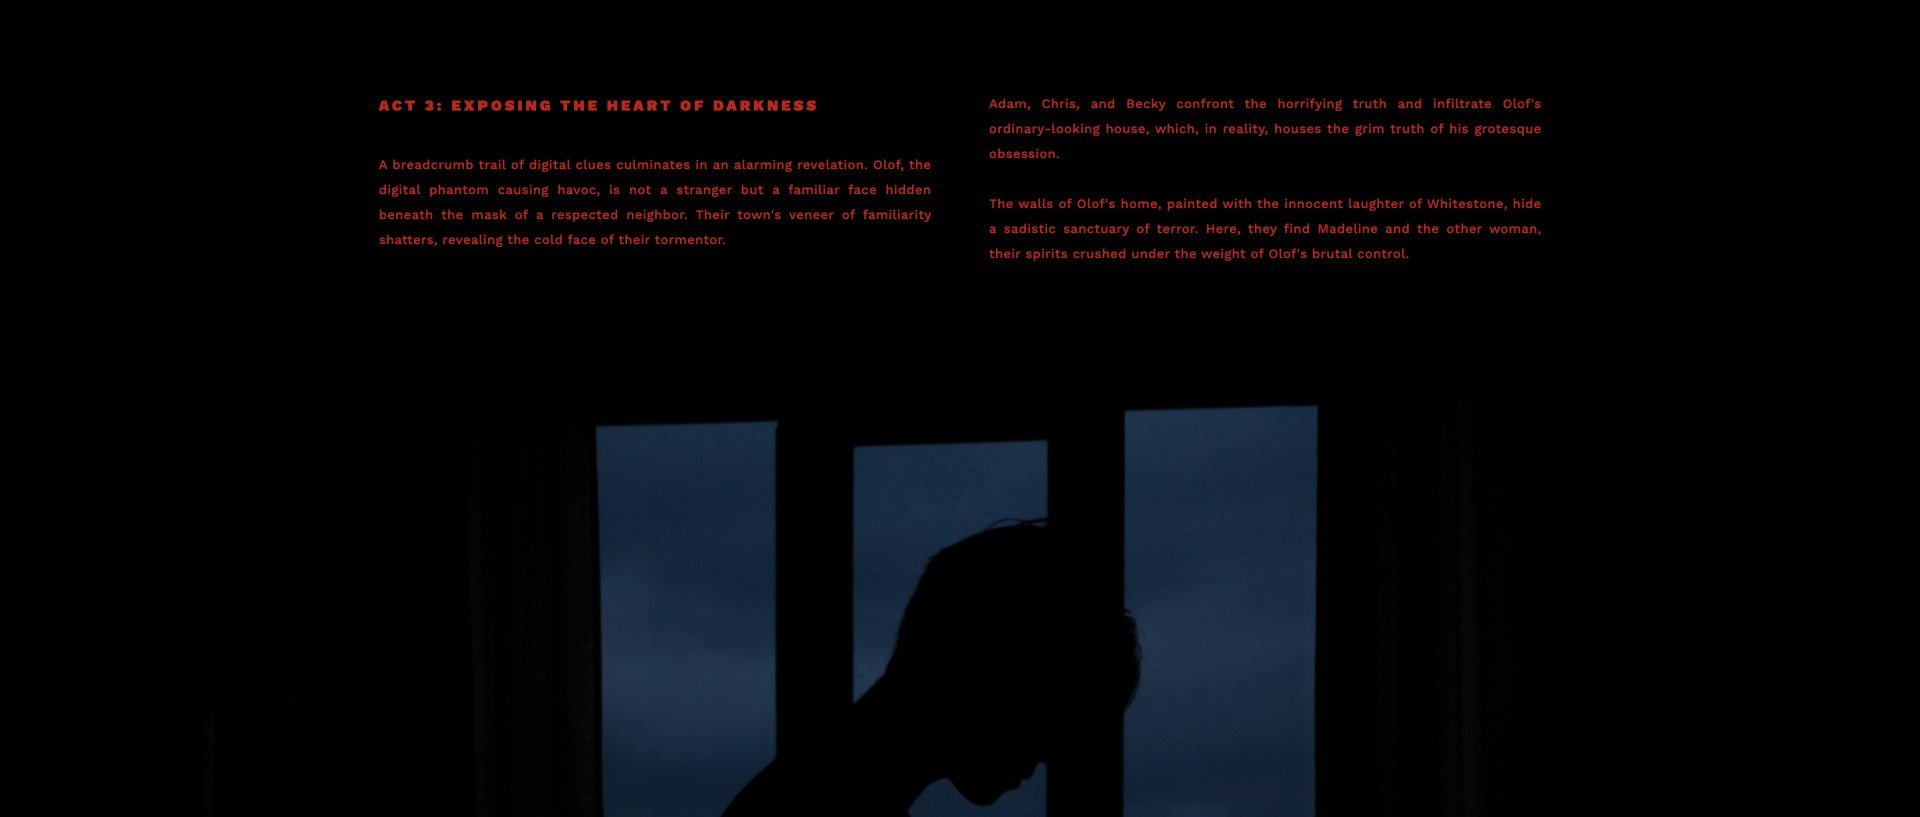 ‎Film Pitch Deck Template - Sinister Obsession.‎013.jpeg